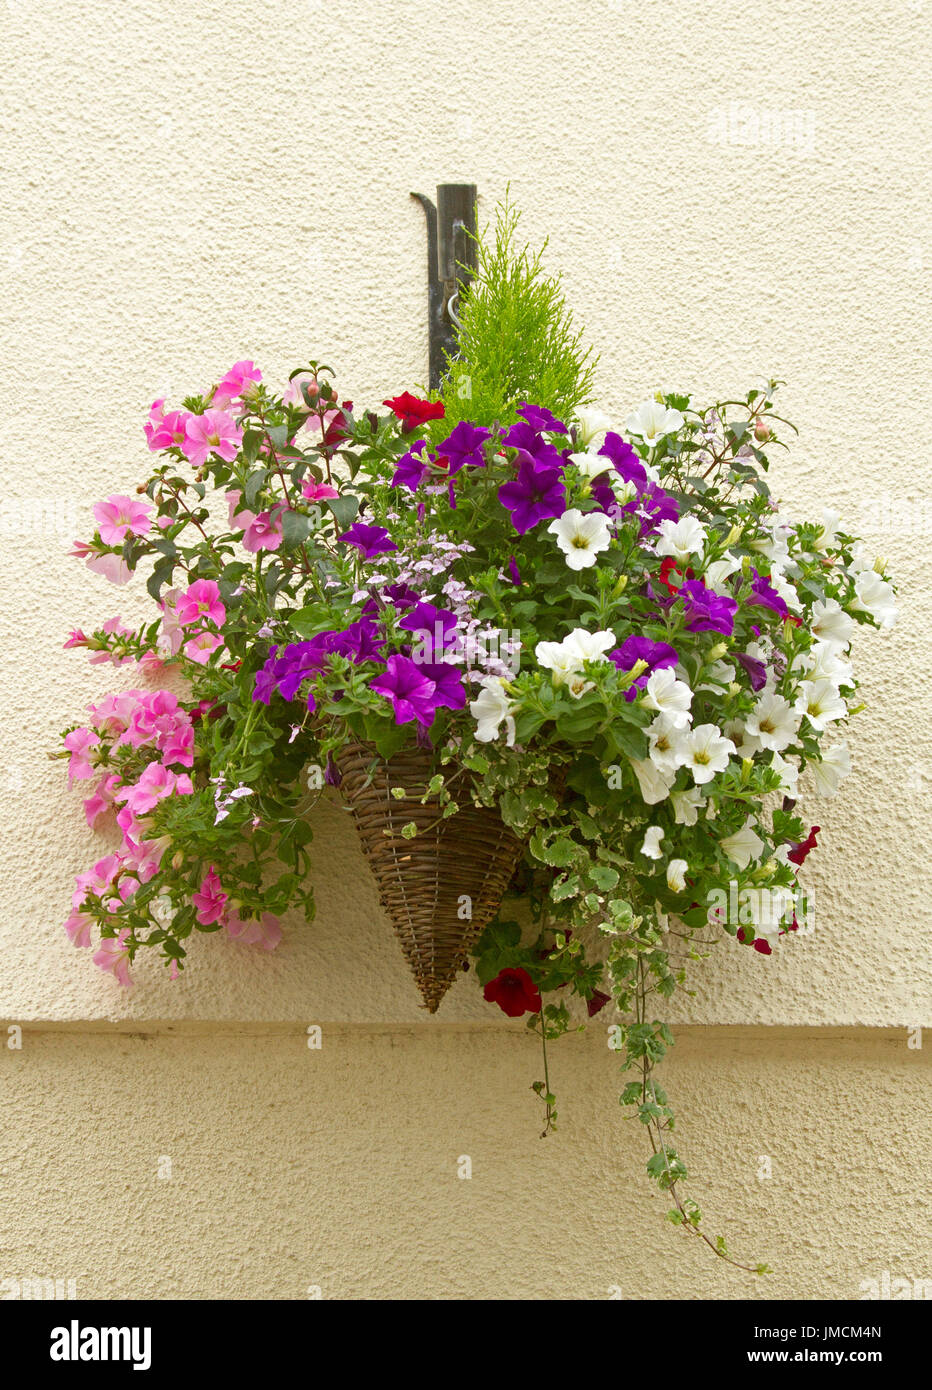 Mass of colourful flowering annuals, inc. purple, pink and white petunias, in hanging basket against cream wall Stock Photo